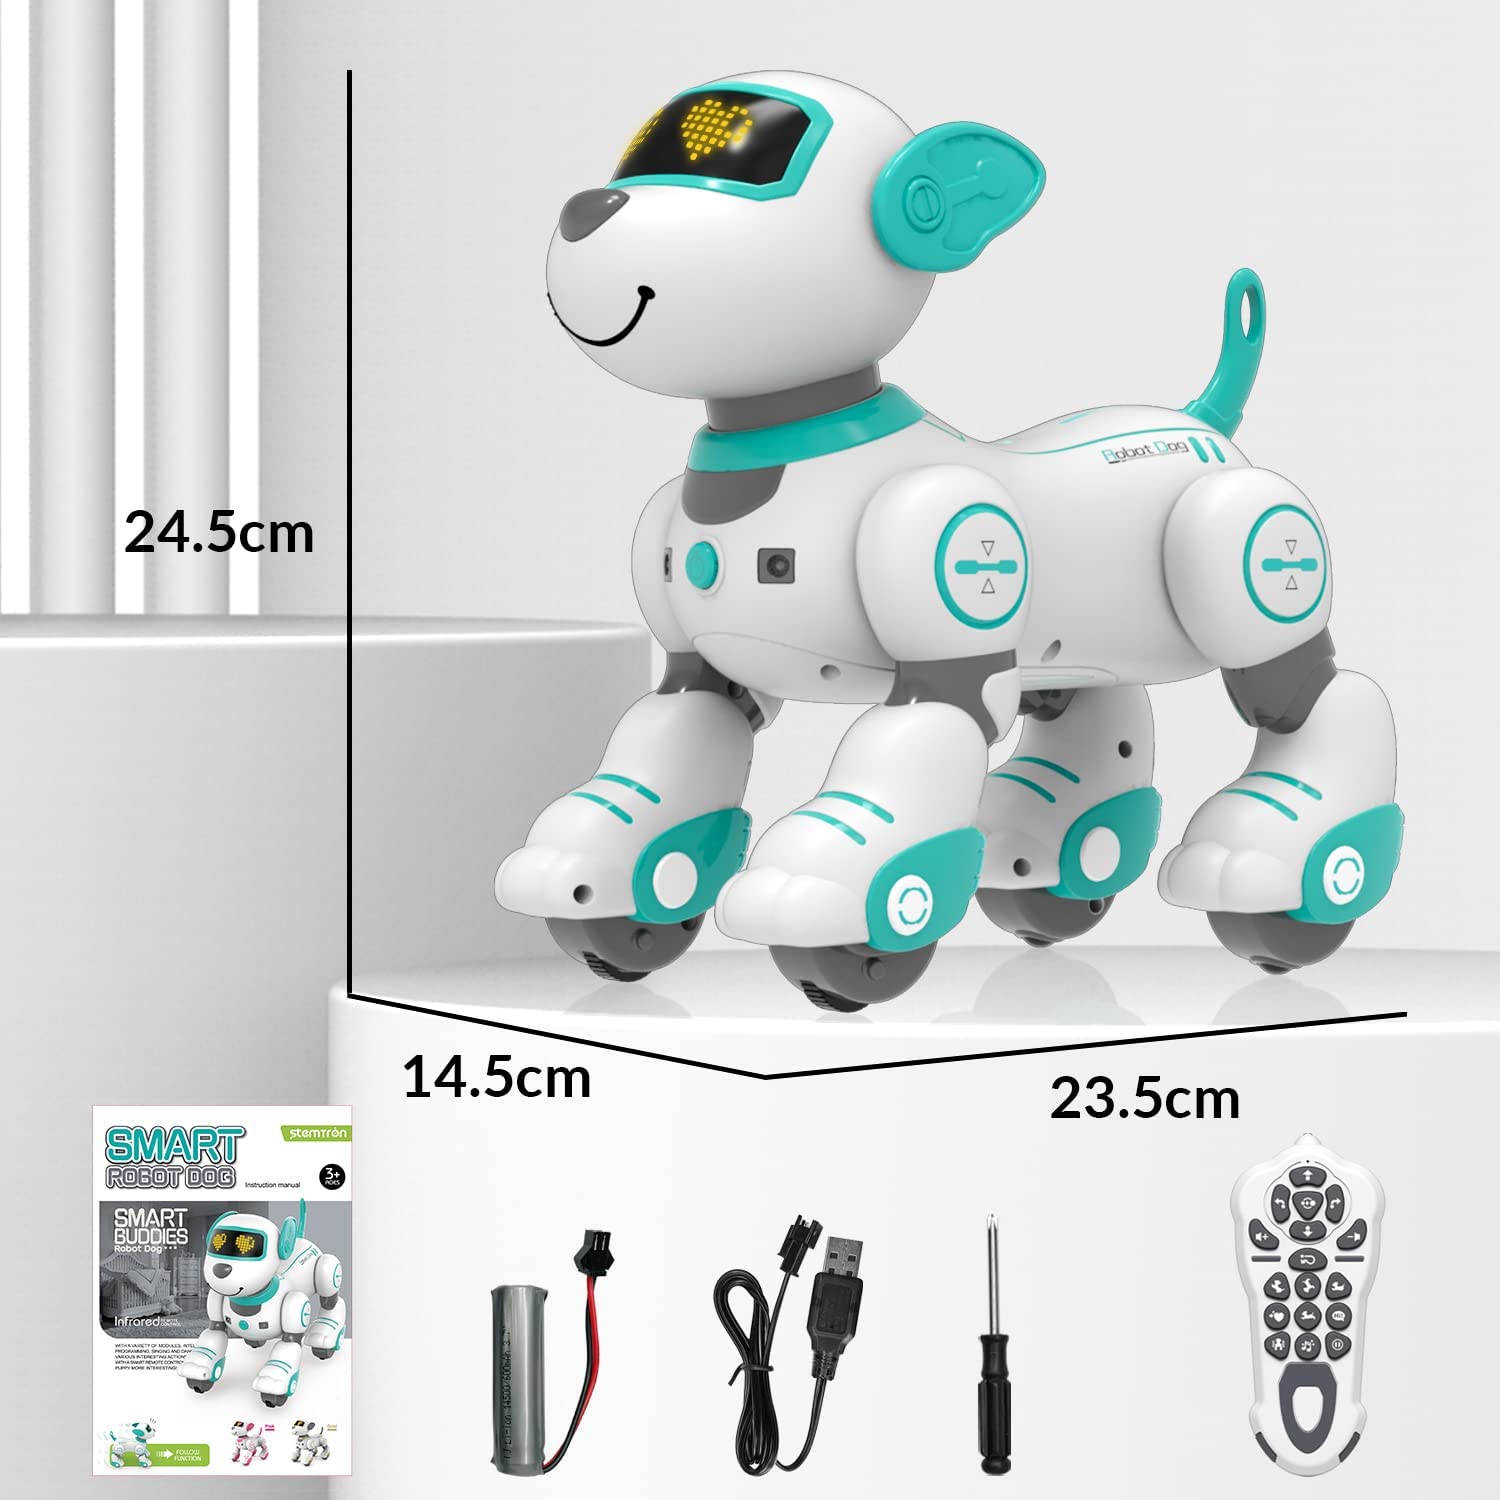 STEMTRON Smart Dancing Remote Control Robot Dog Toy Blue-EXHOBBY